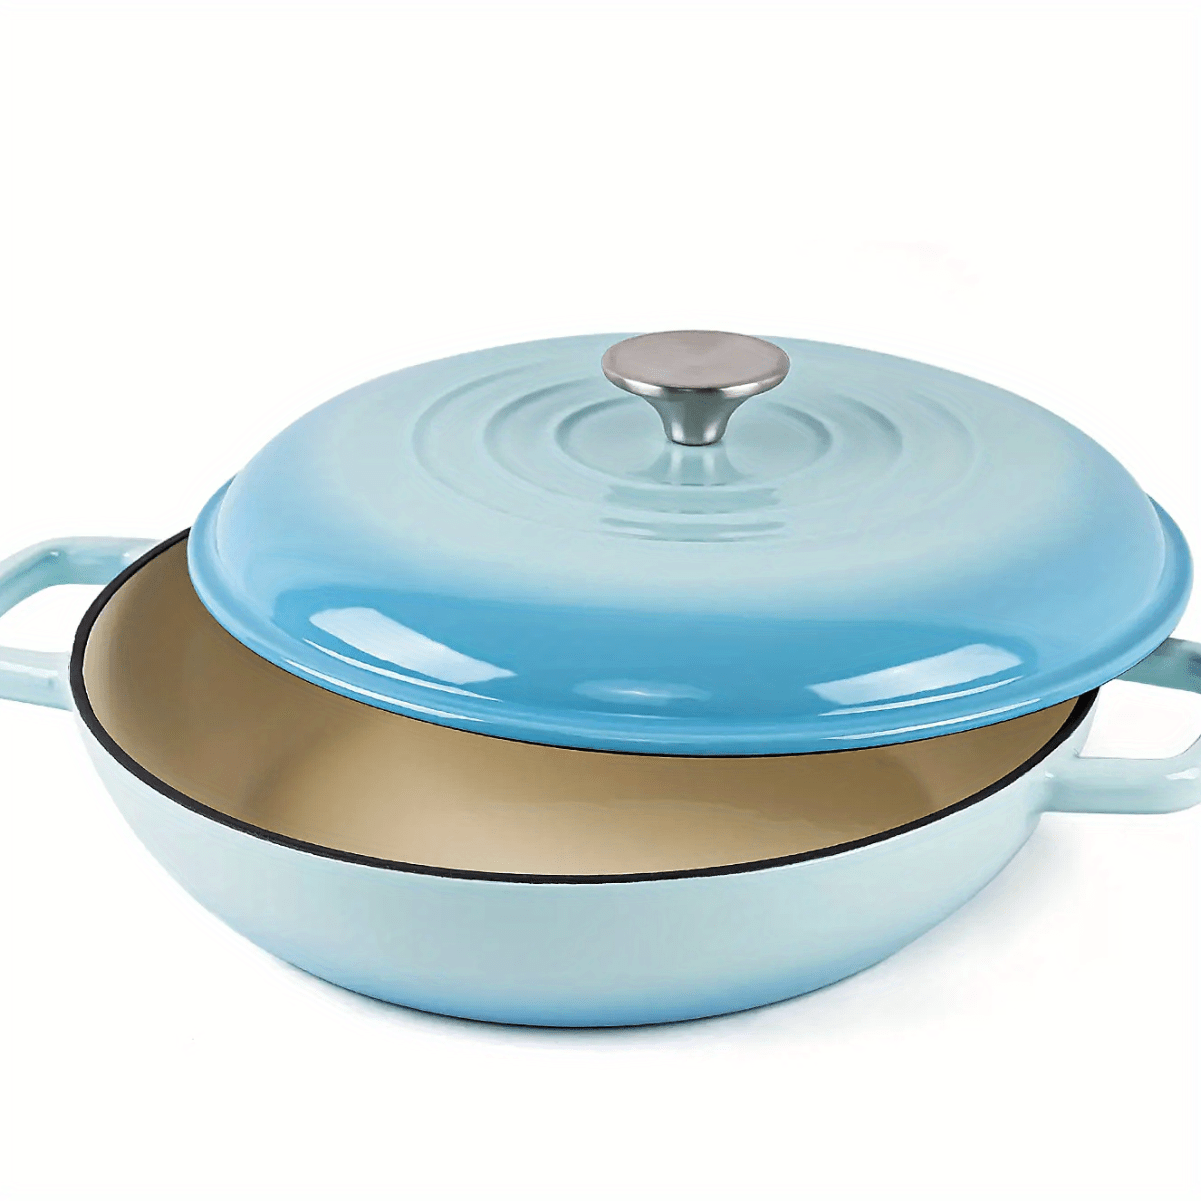 Enameled Blue 2-in-1 Cast Iron Multi-Cooker Heavy Duty Skillet and